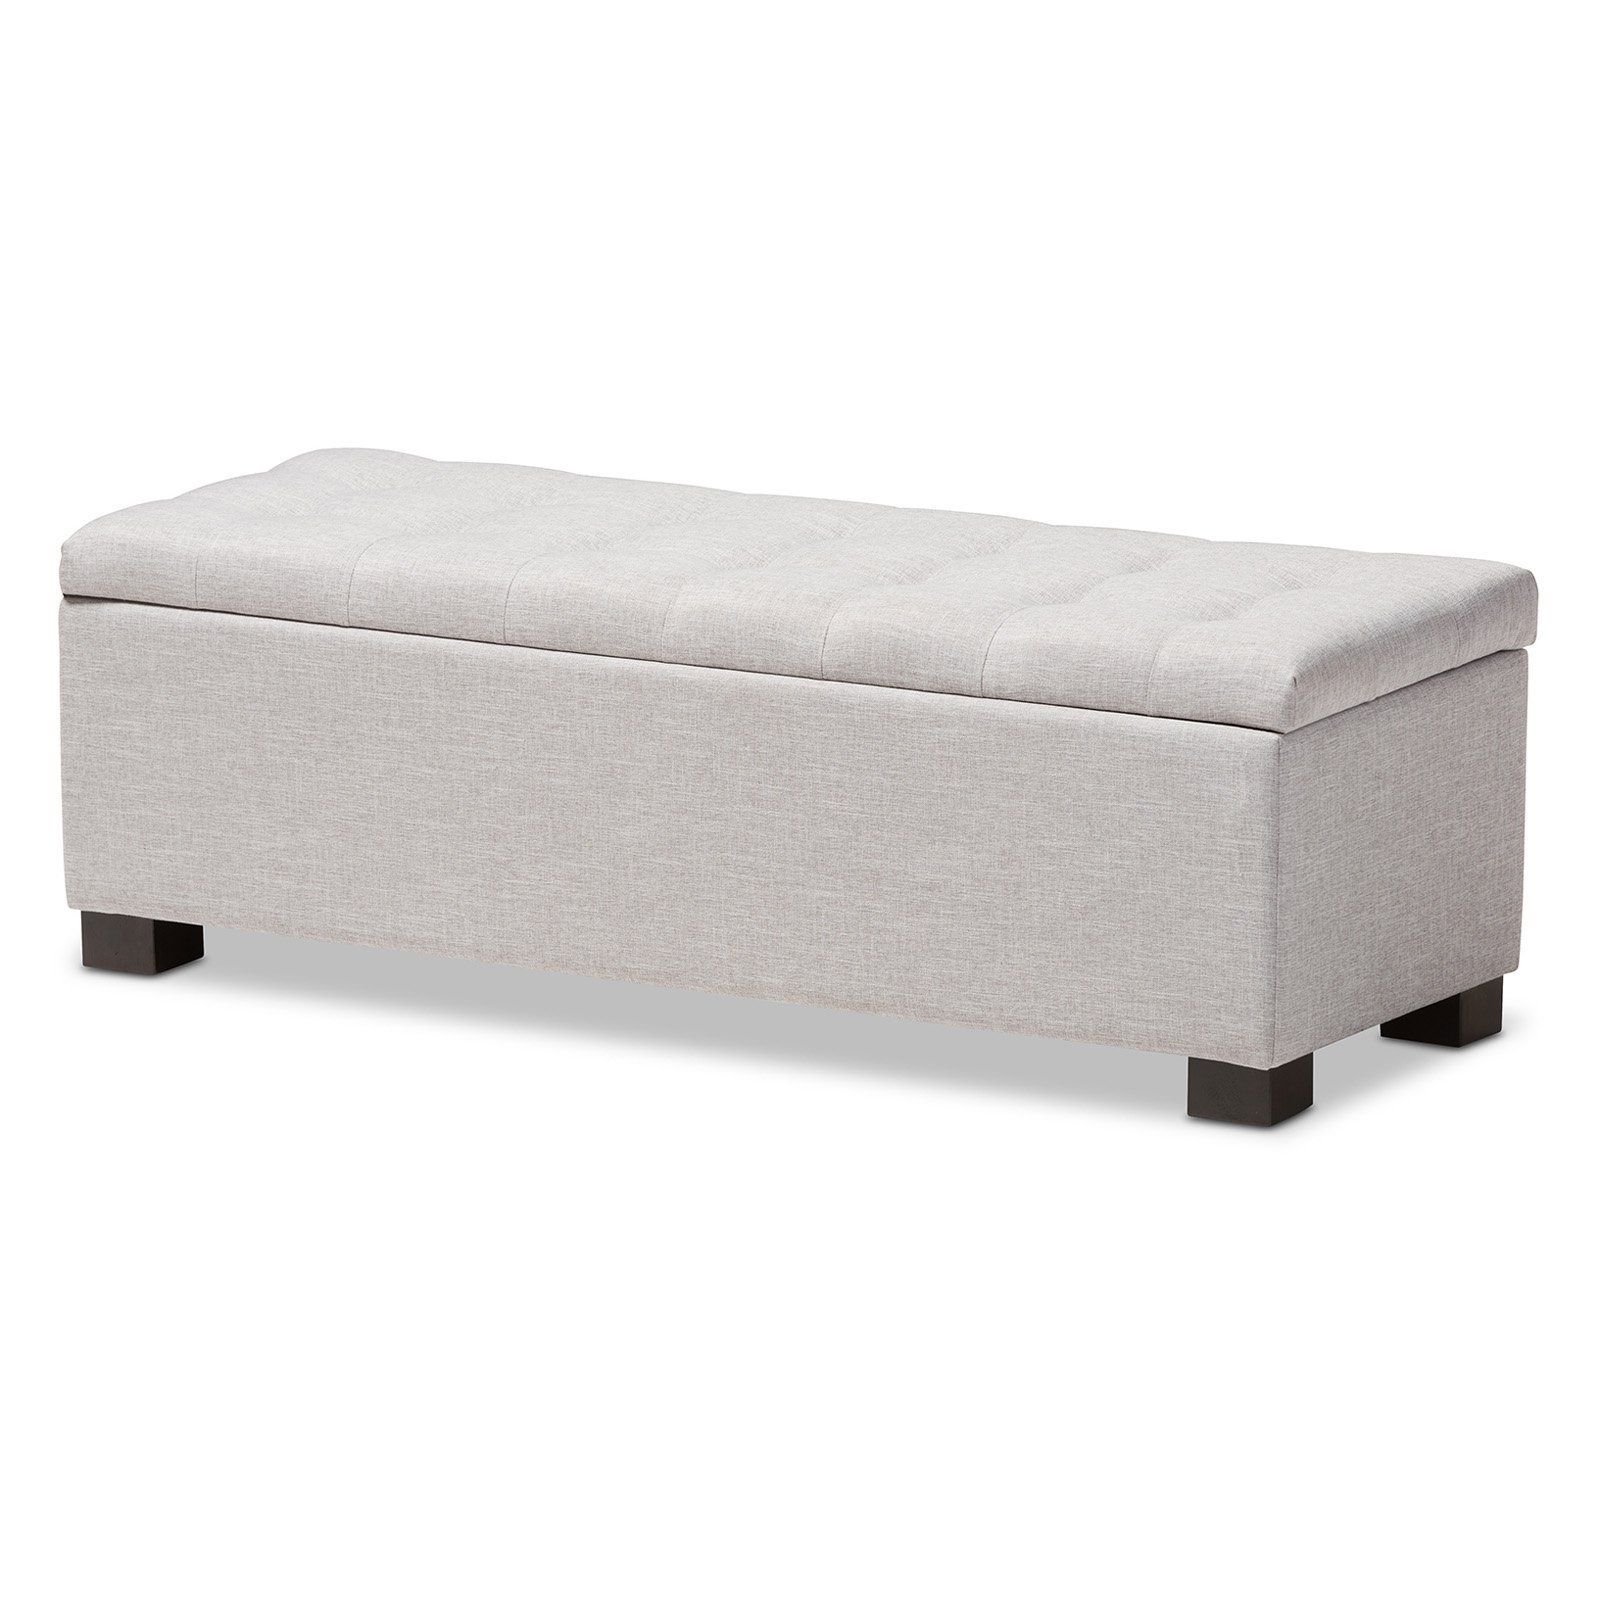 Baxton Studio Roanoke Upholstered Storage Ottoman Grayish Beige With Regard To Gray And Brown Stripes Cylinder Pouf Ottomans (View 14 of 20)